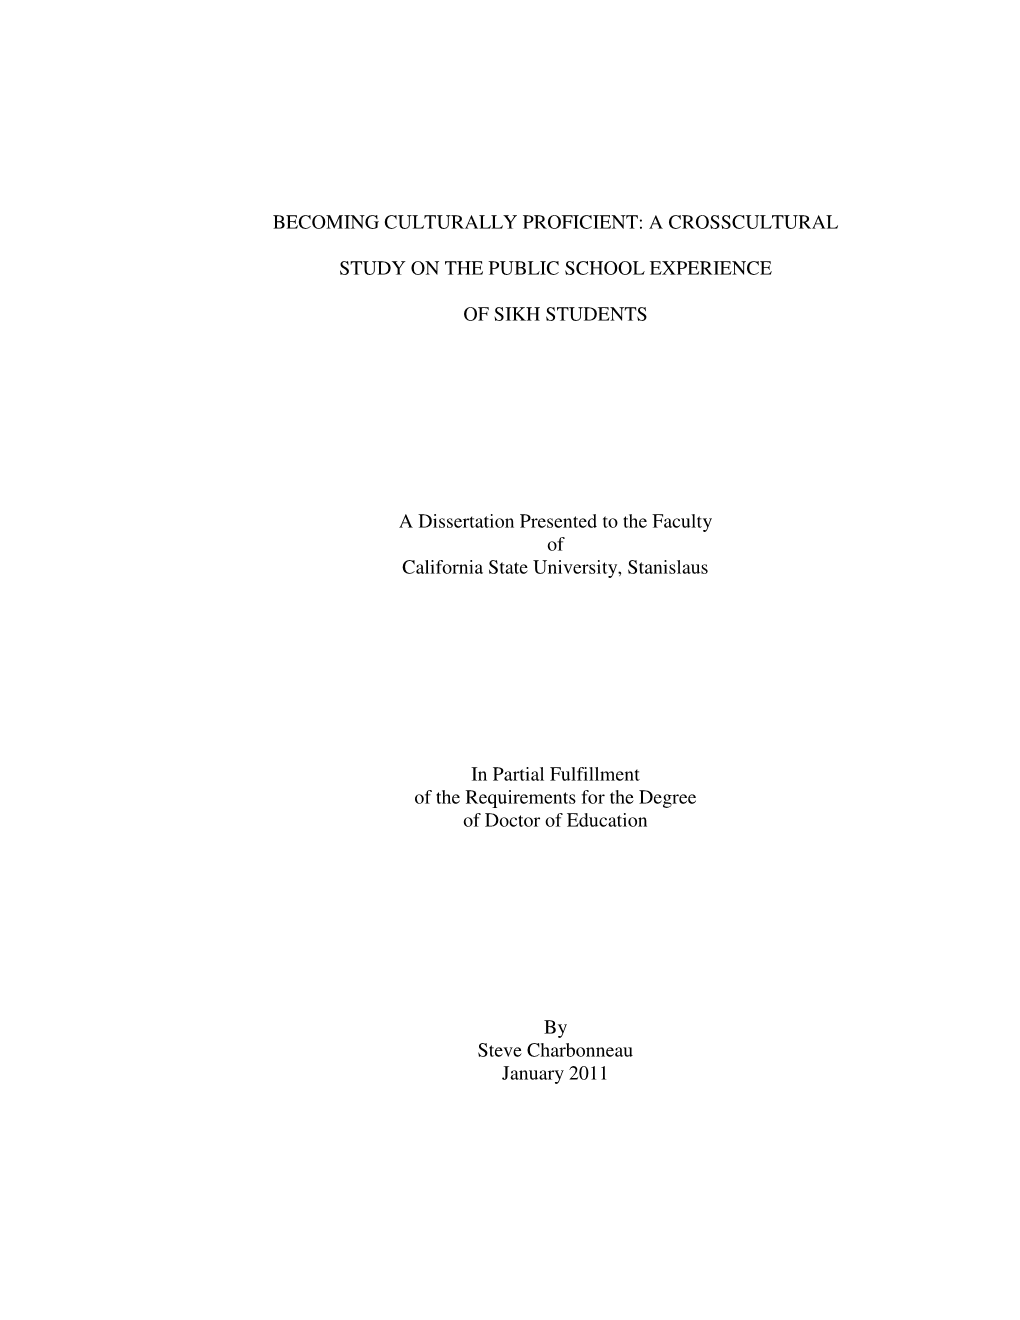 A CROSSCULTURAL STUDY on the PUBLIC SCHOOL EXPERIENCE of SIKH STUDENTS a Dissertation Presented